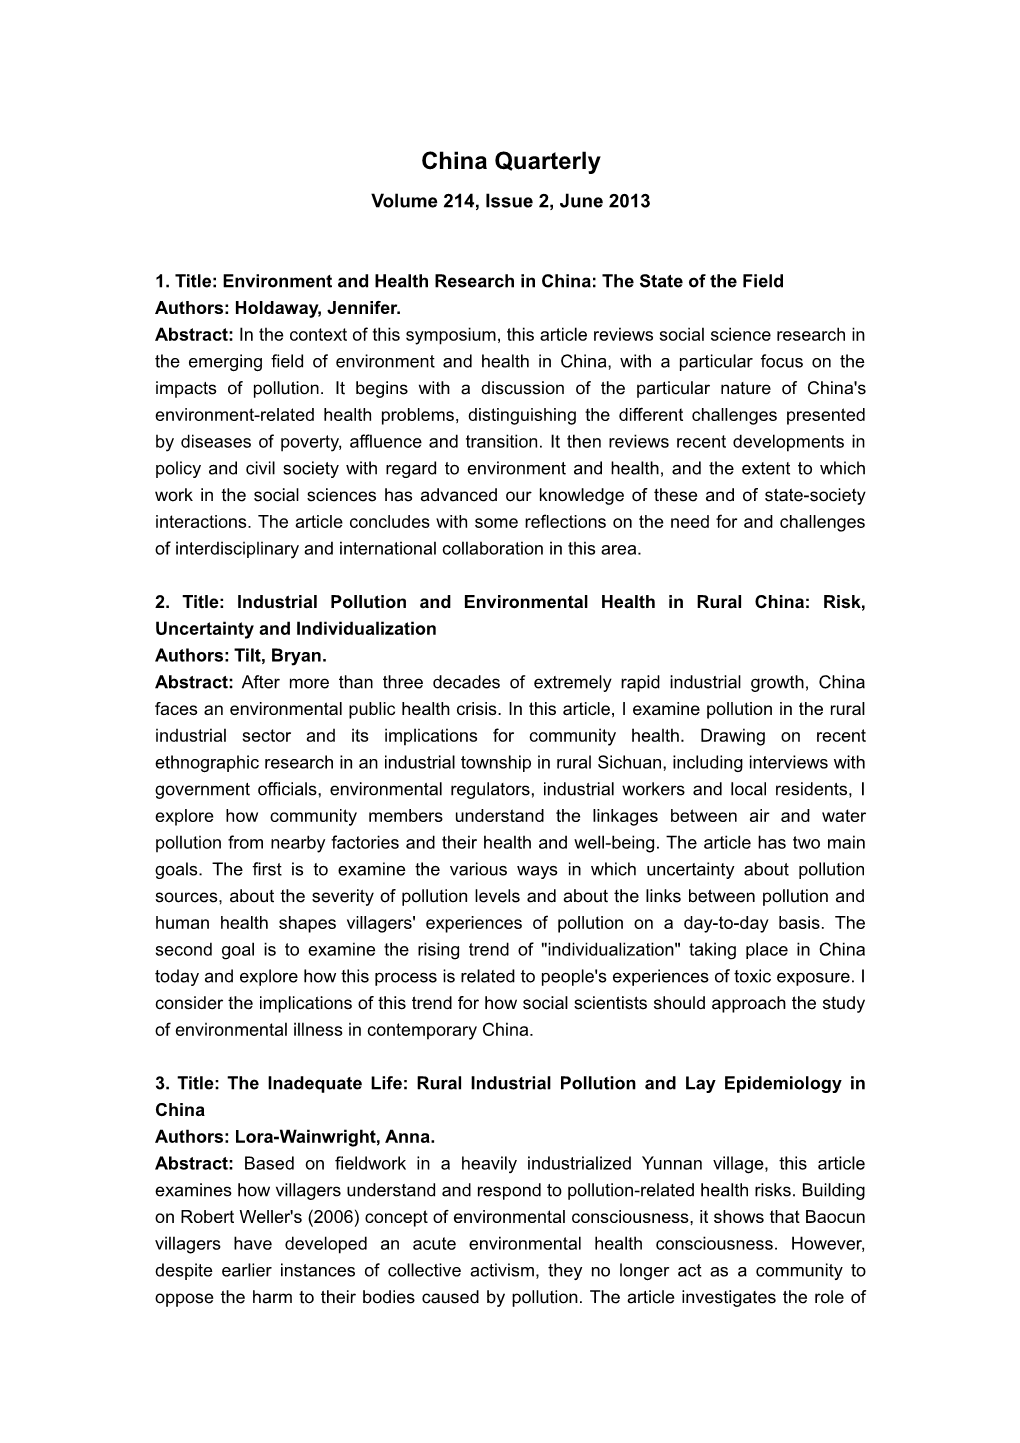 1. Title:Environment and Health Research in China: the State of the Field